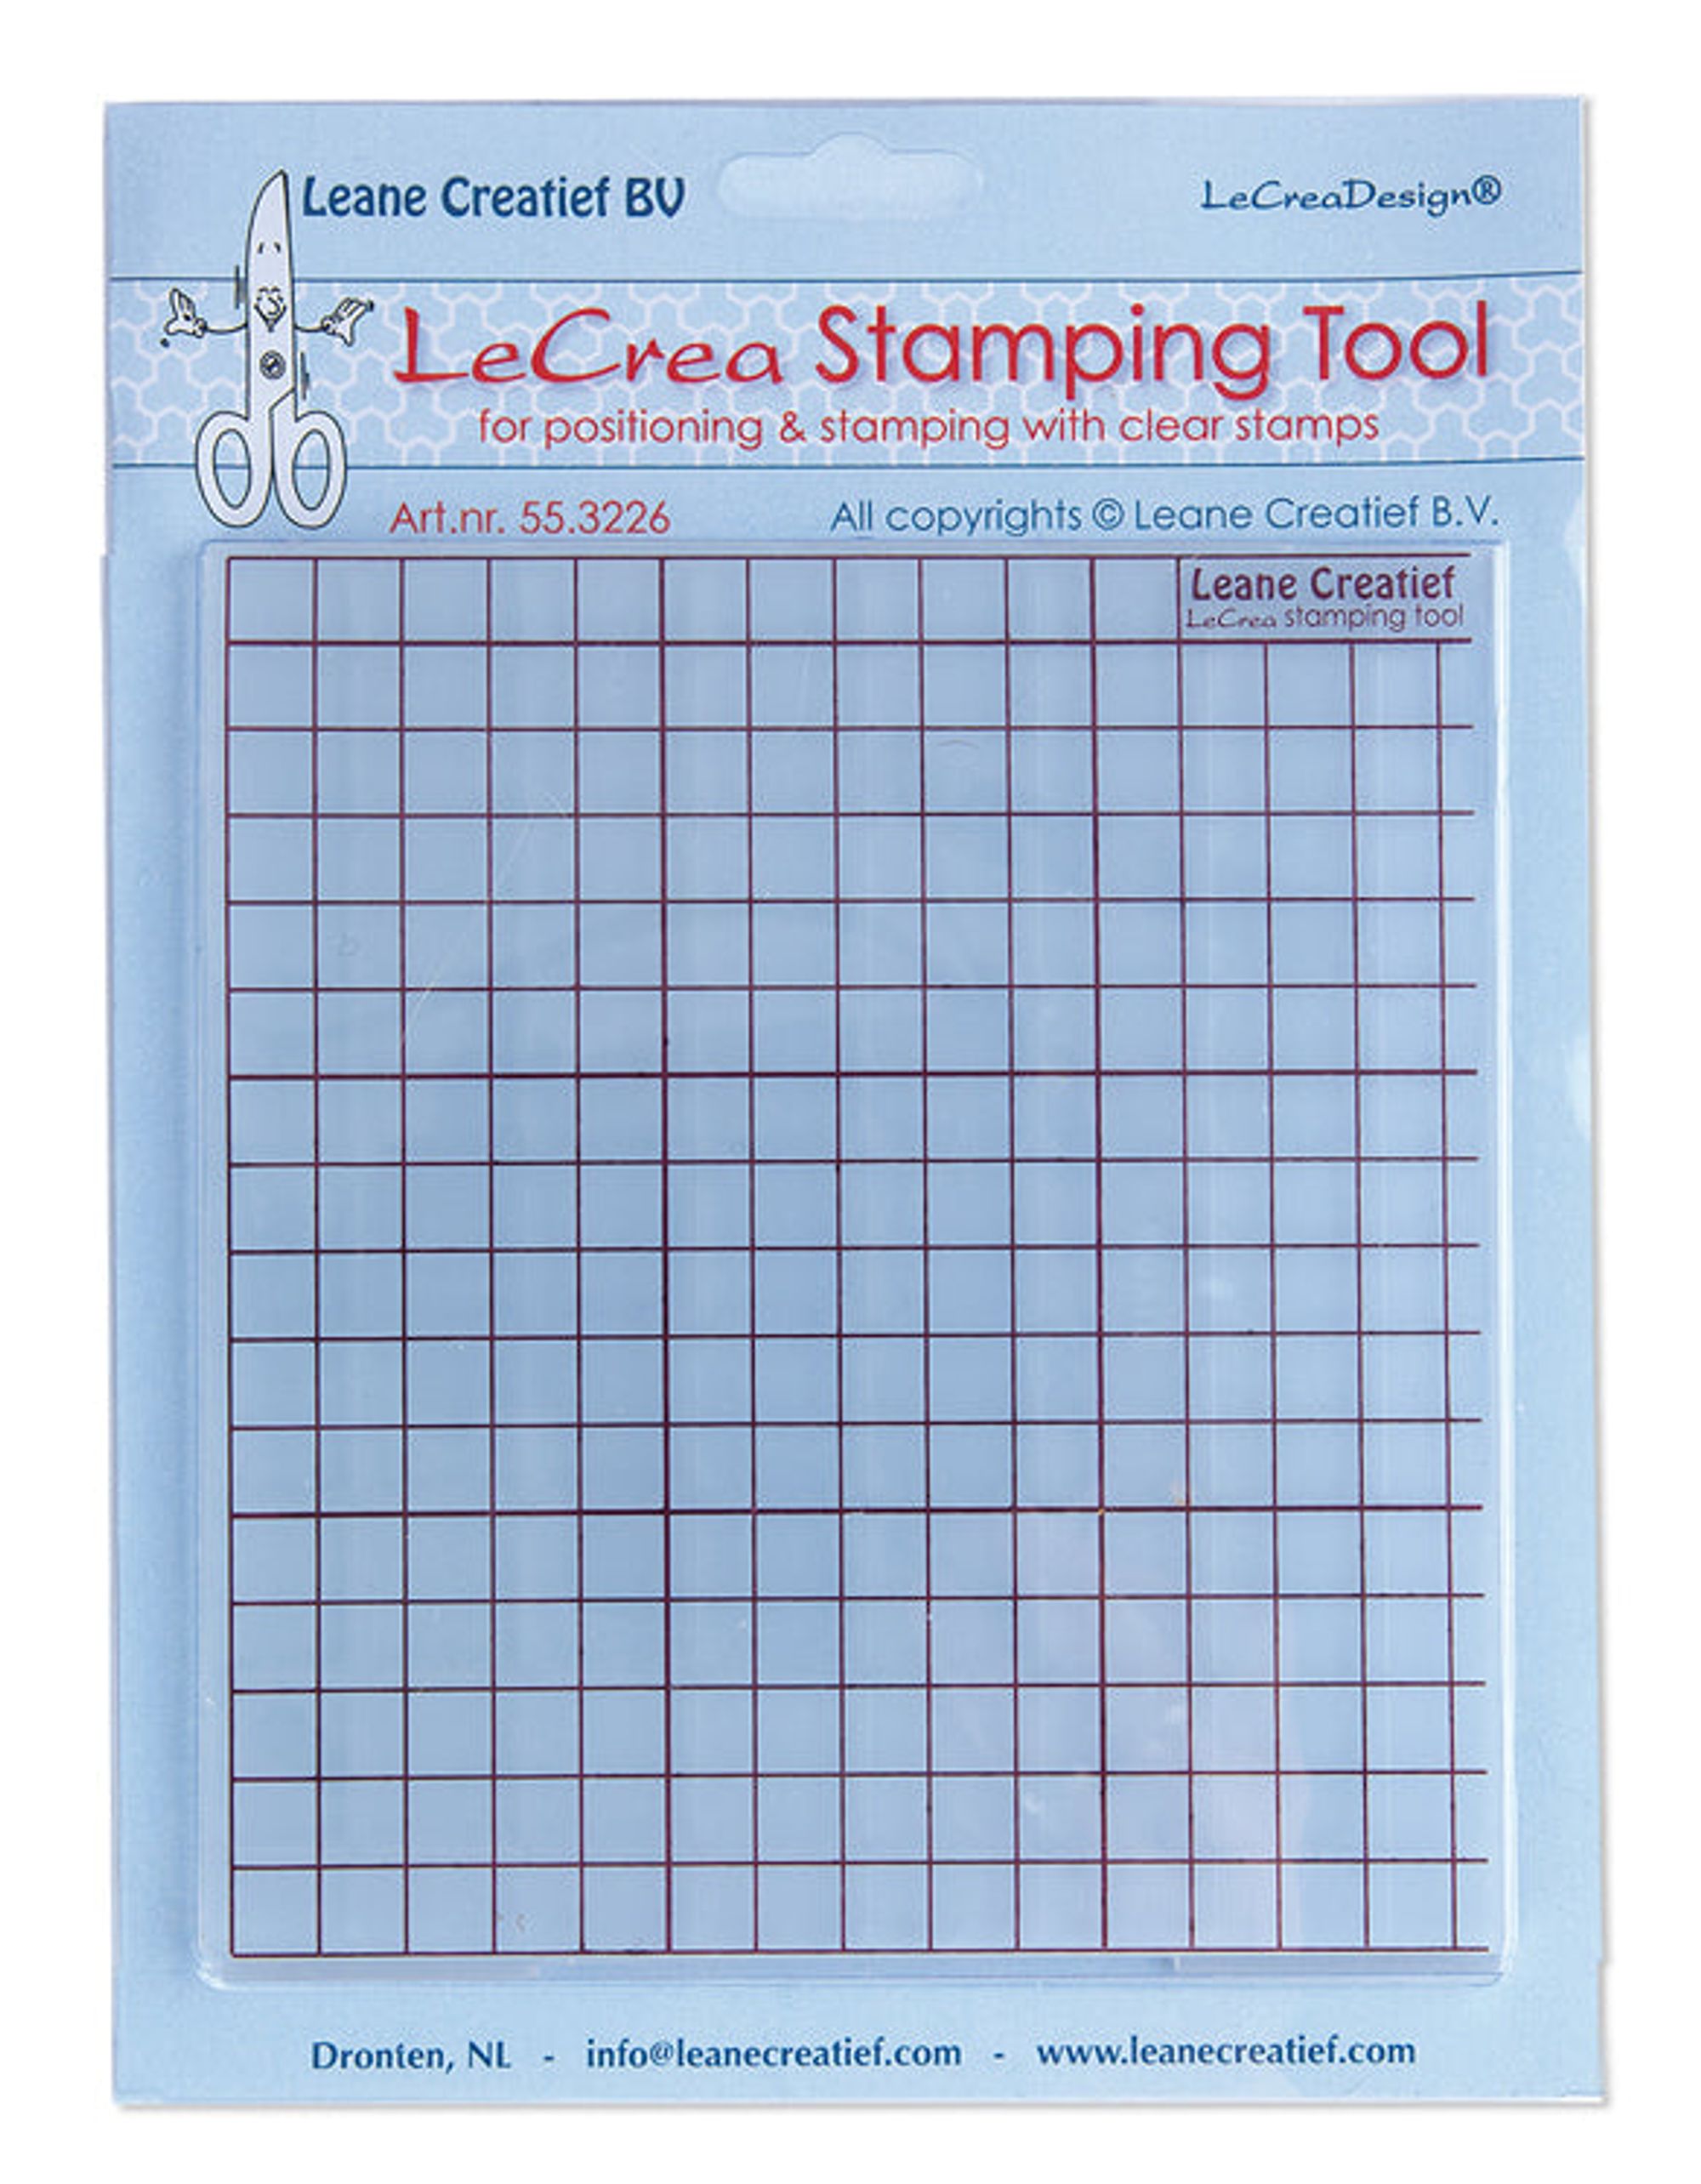 LeCrea Stamping Tool for Positioning & Stamping Clear Stamps